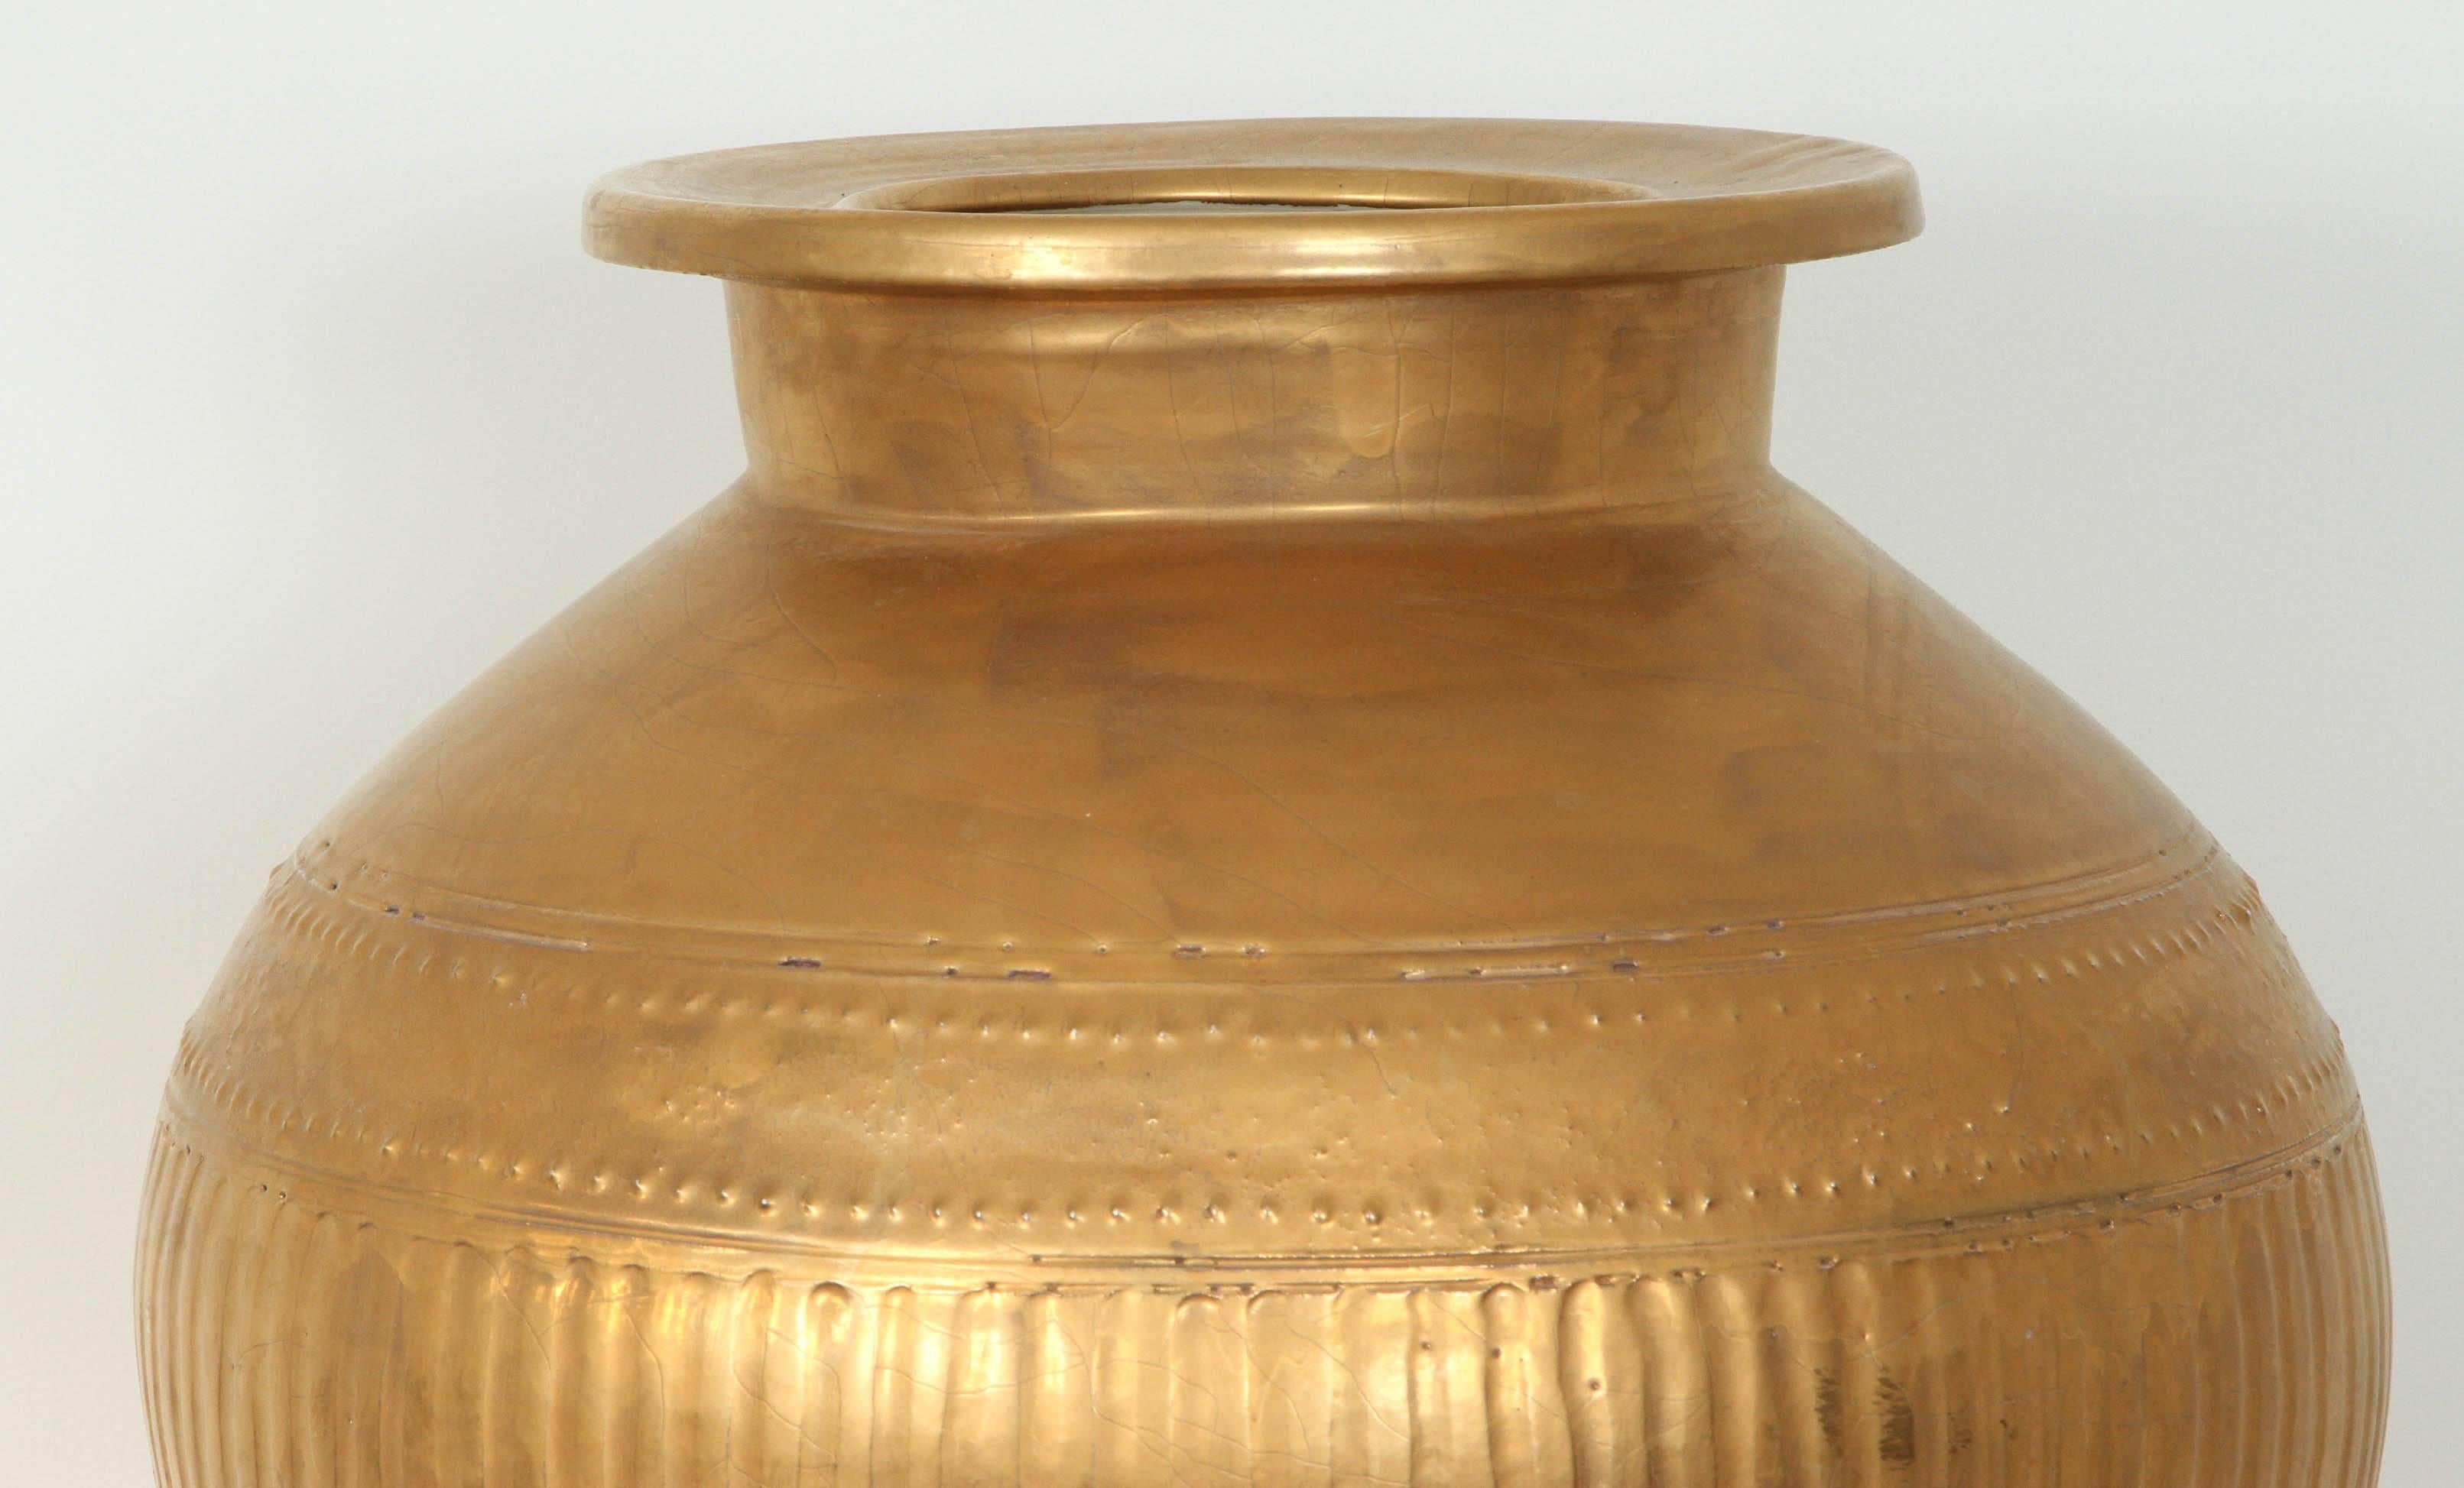 This beautiful and enormous gilded ceramic urn in the form of an antique Amphora.
It came from an Indian Wells estate styled completely by Steve Chase.